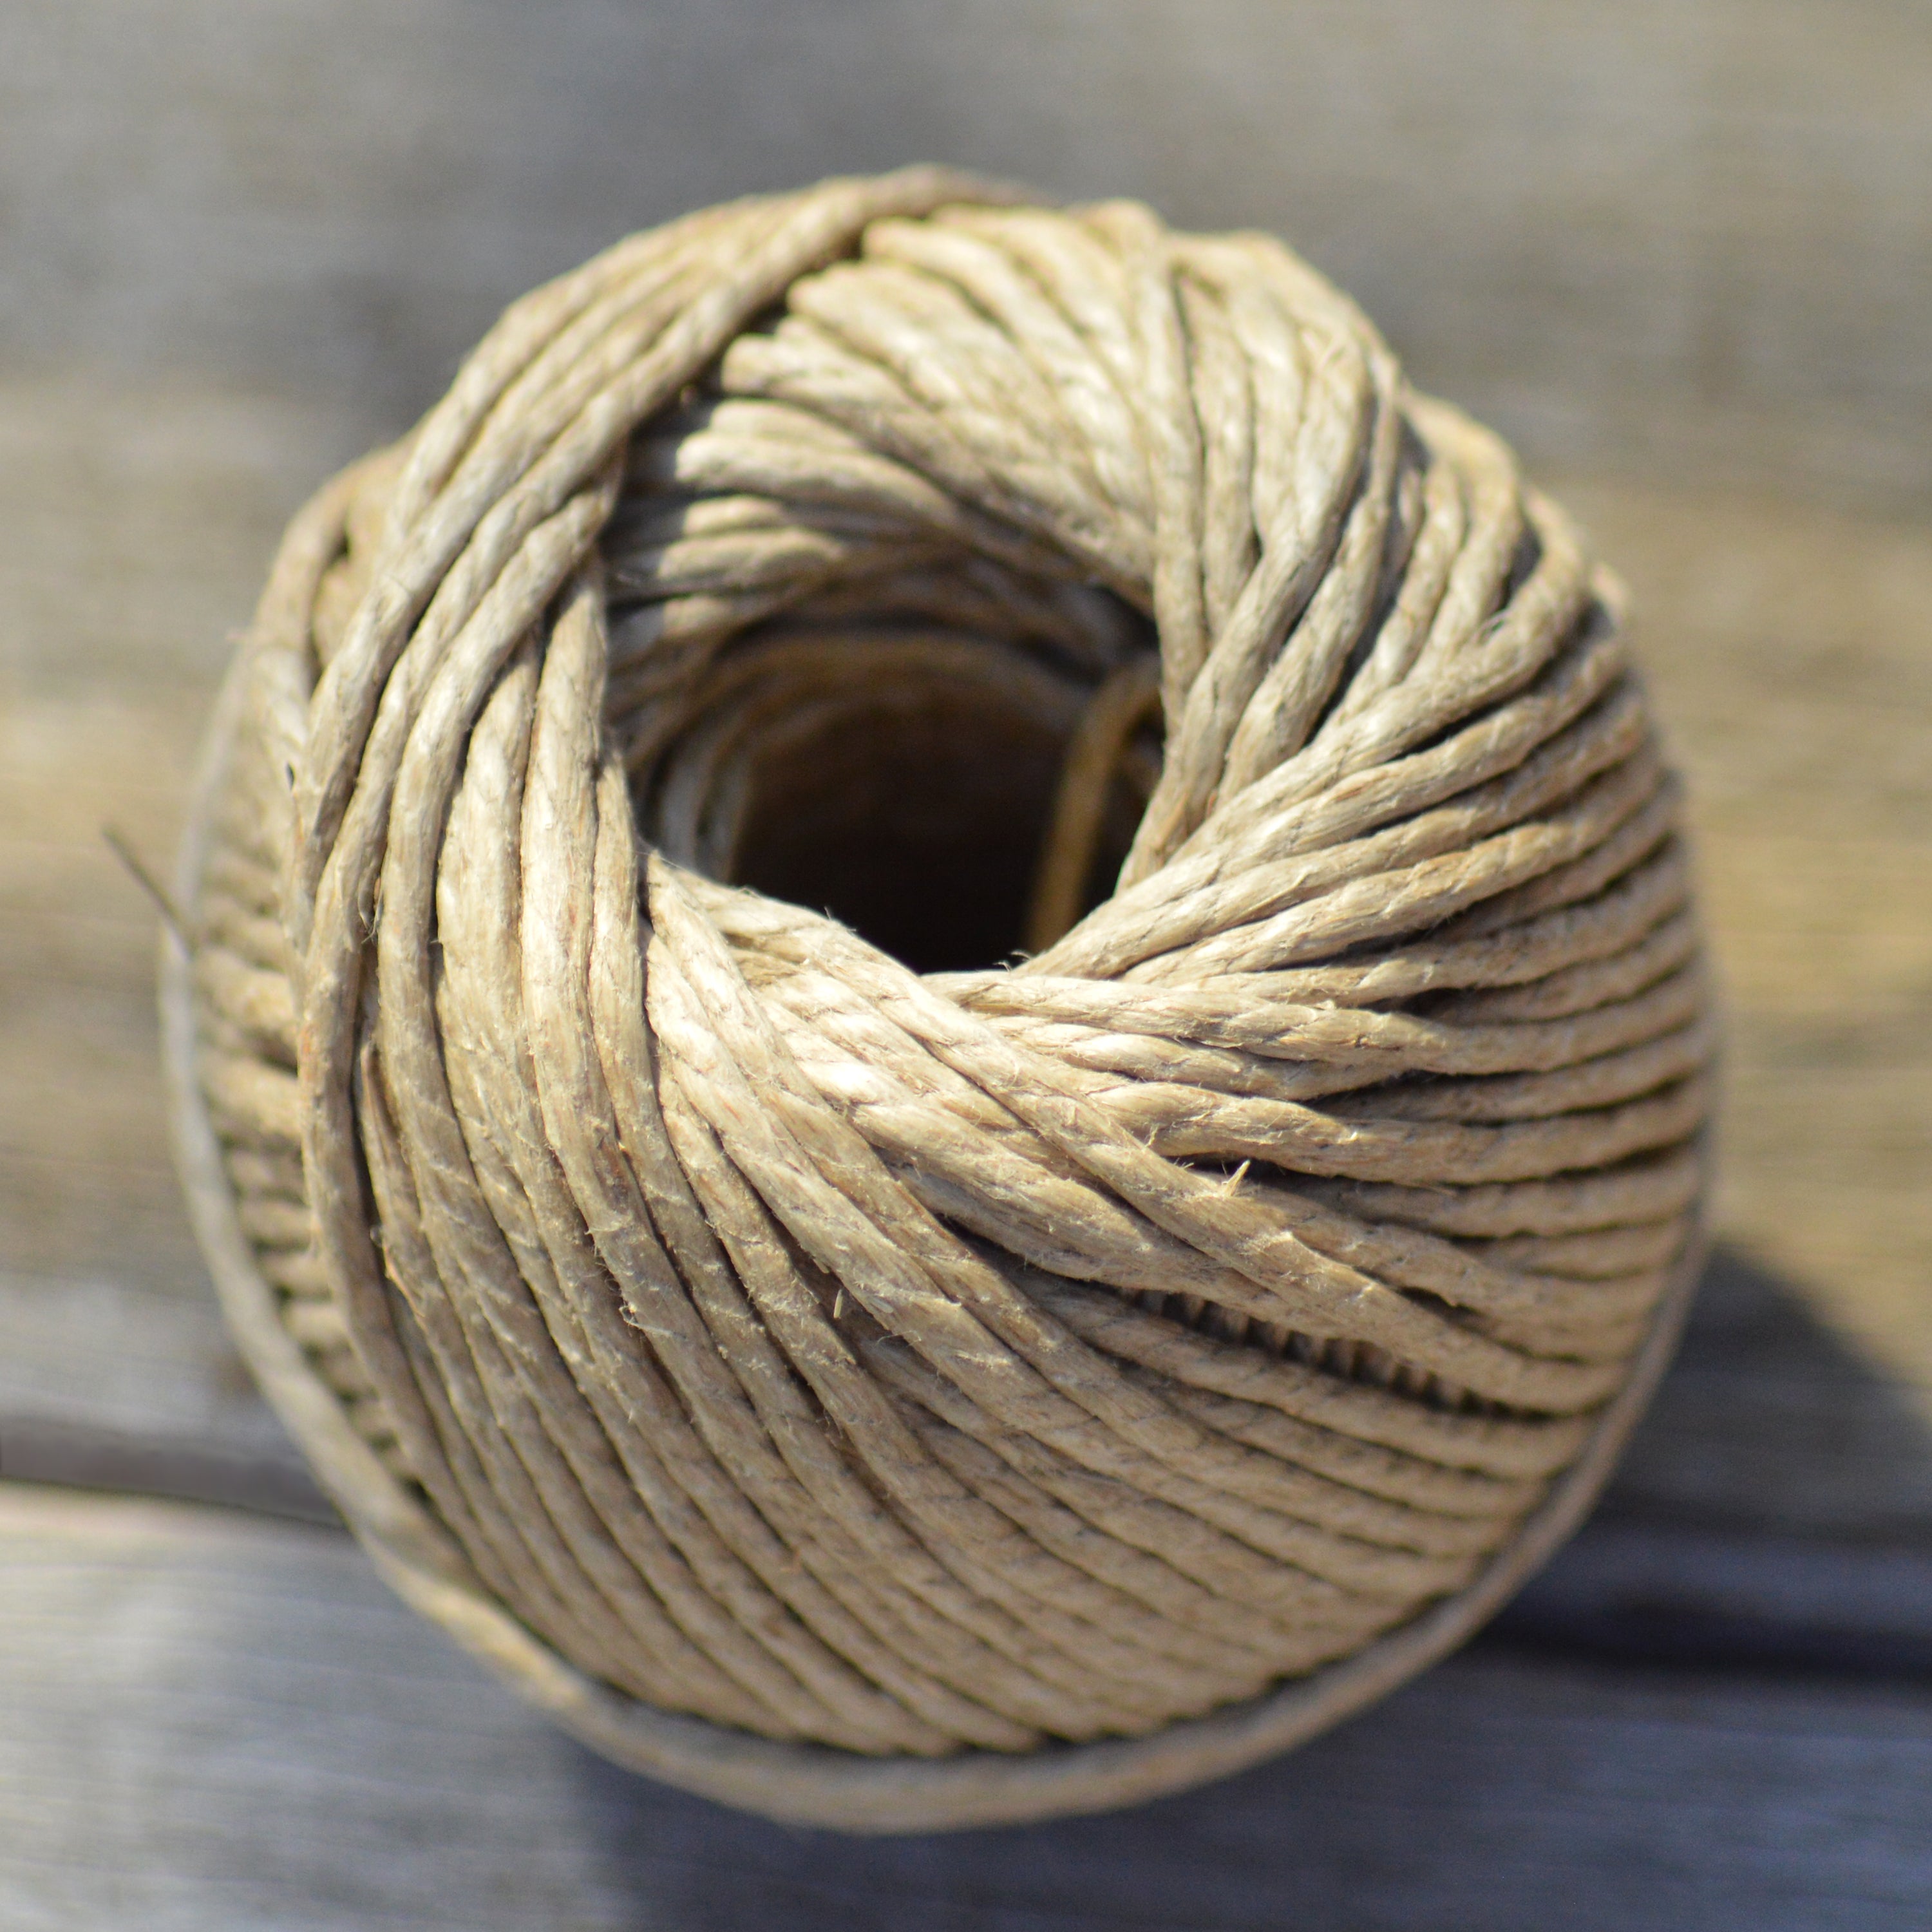 Pure Linen European Cord Twine- large 500g ball.